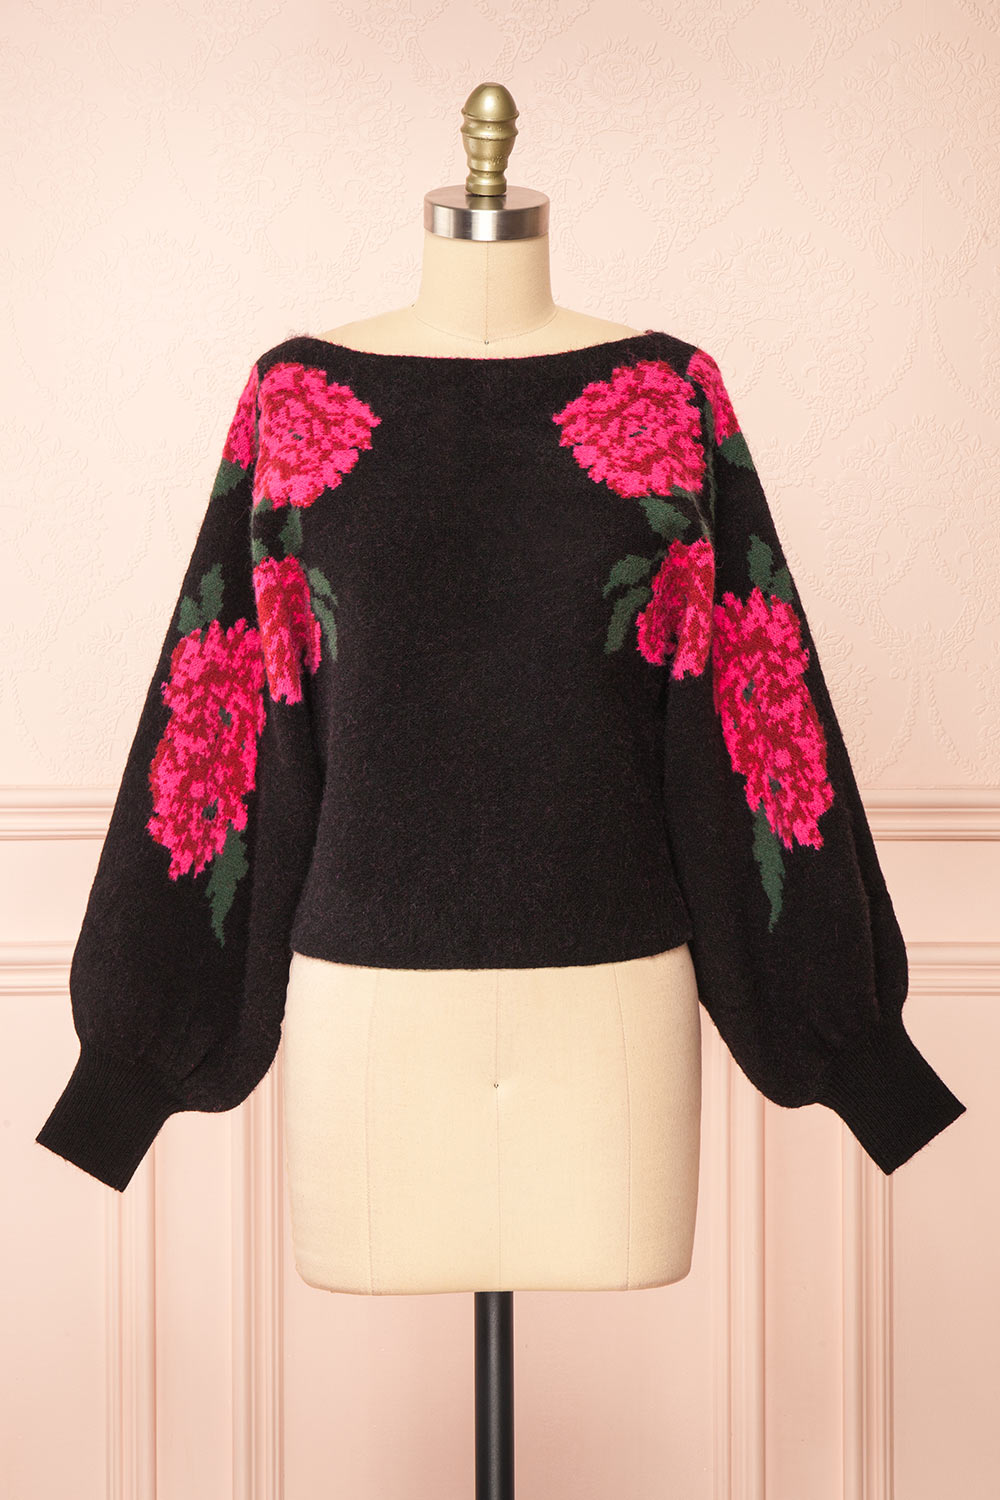 Hargeisa Black Knit Sweater w/ Boat Neckline | Boutique 1861 front view